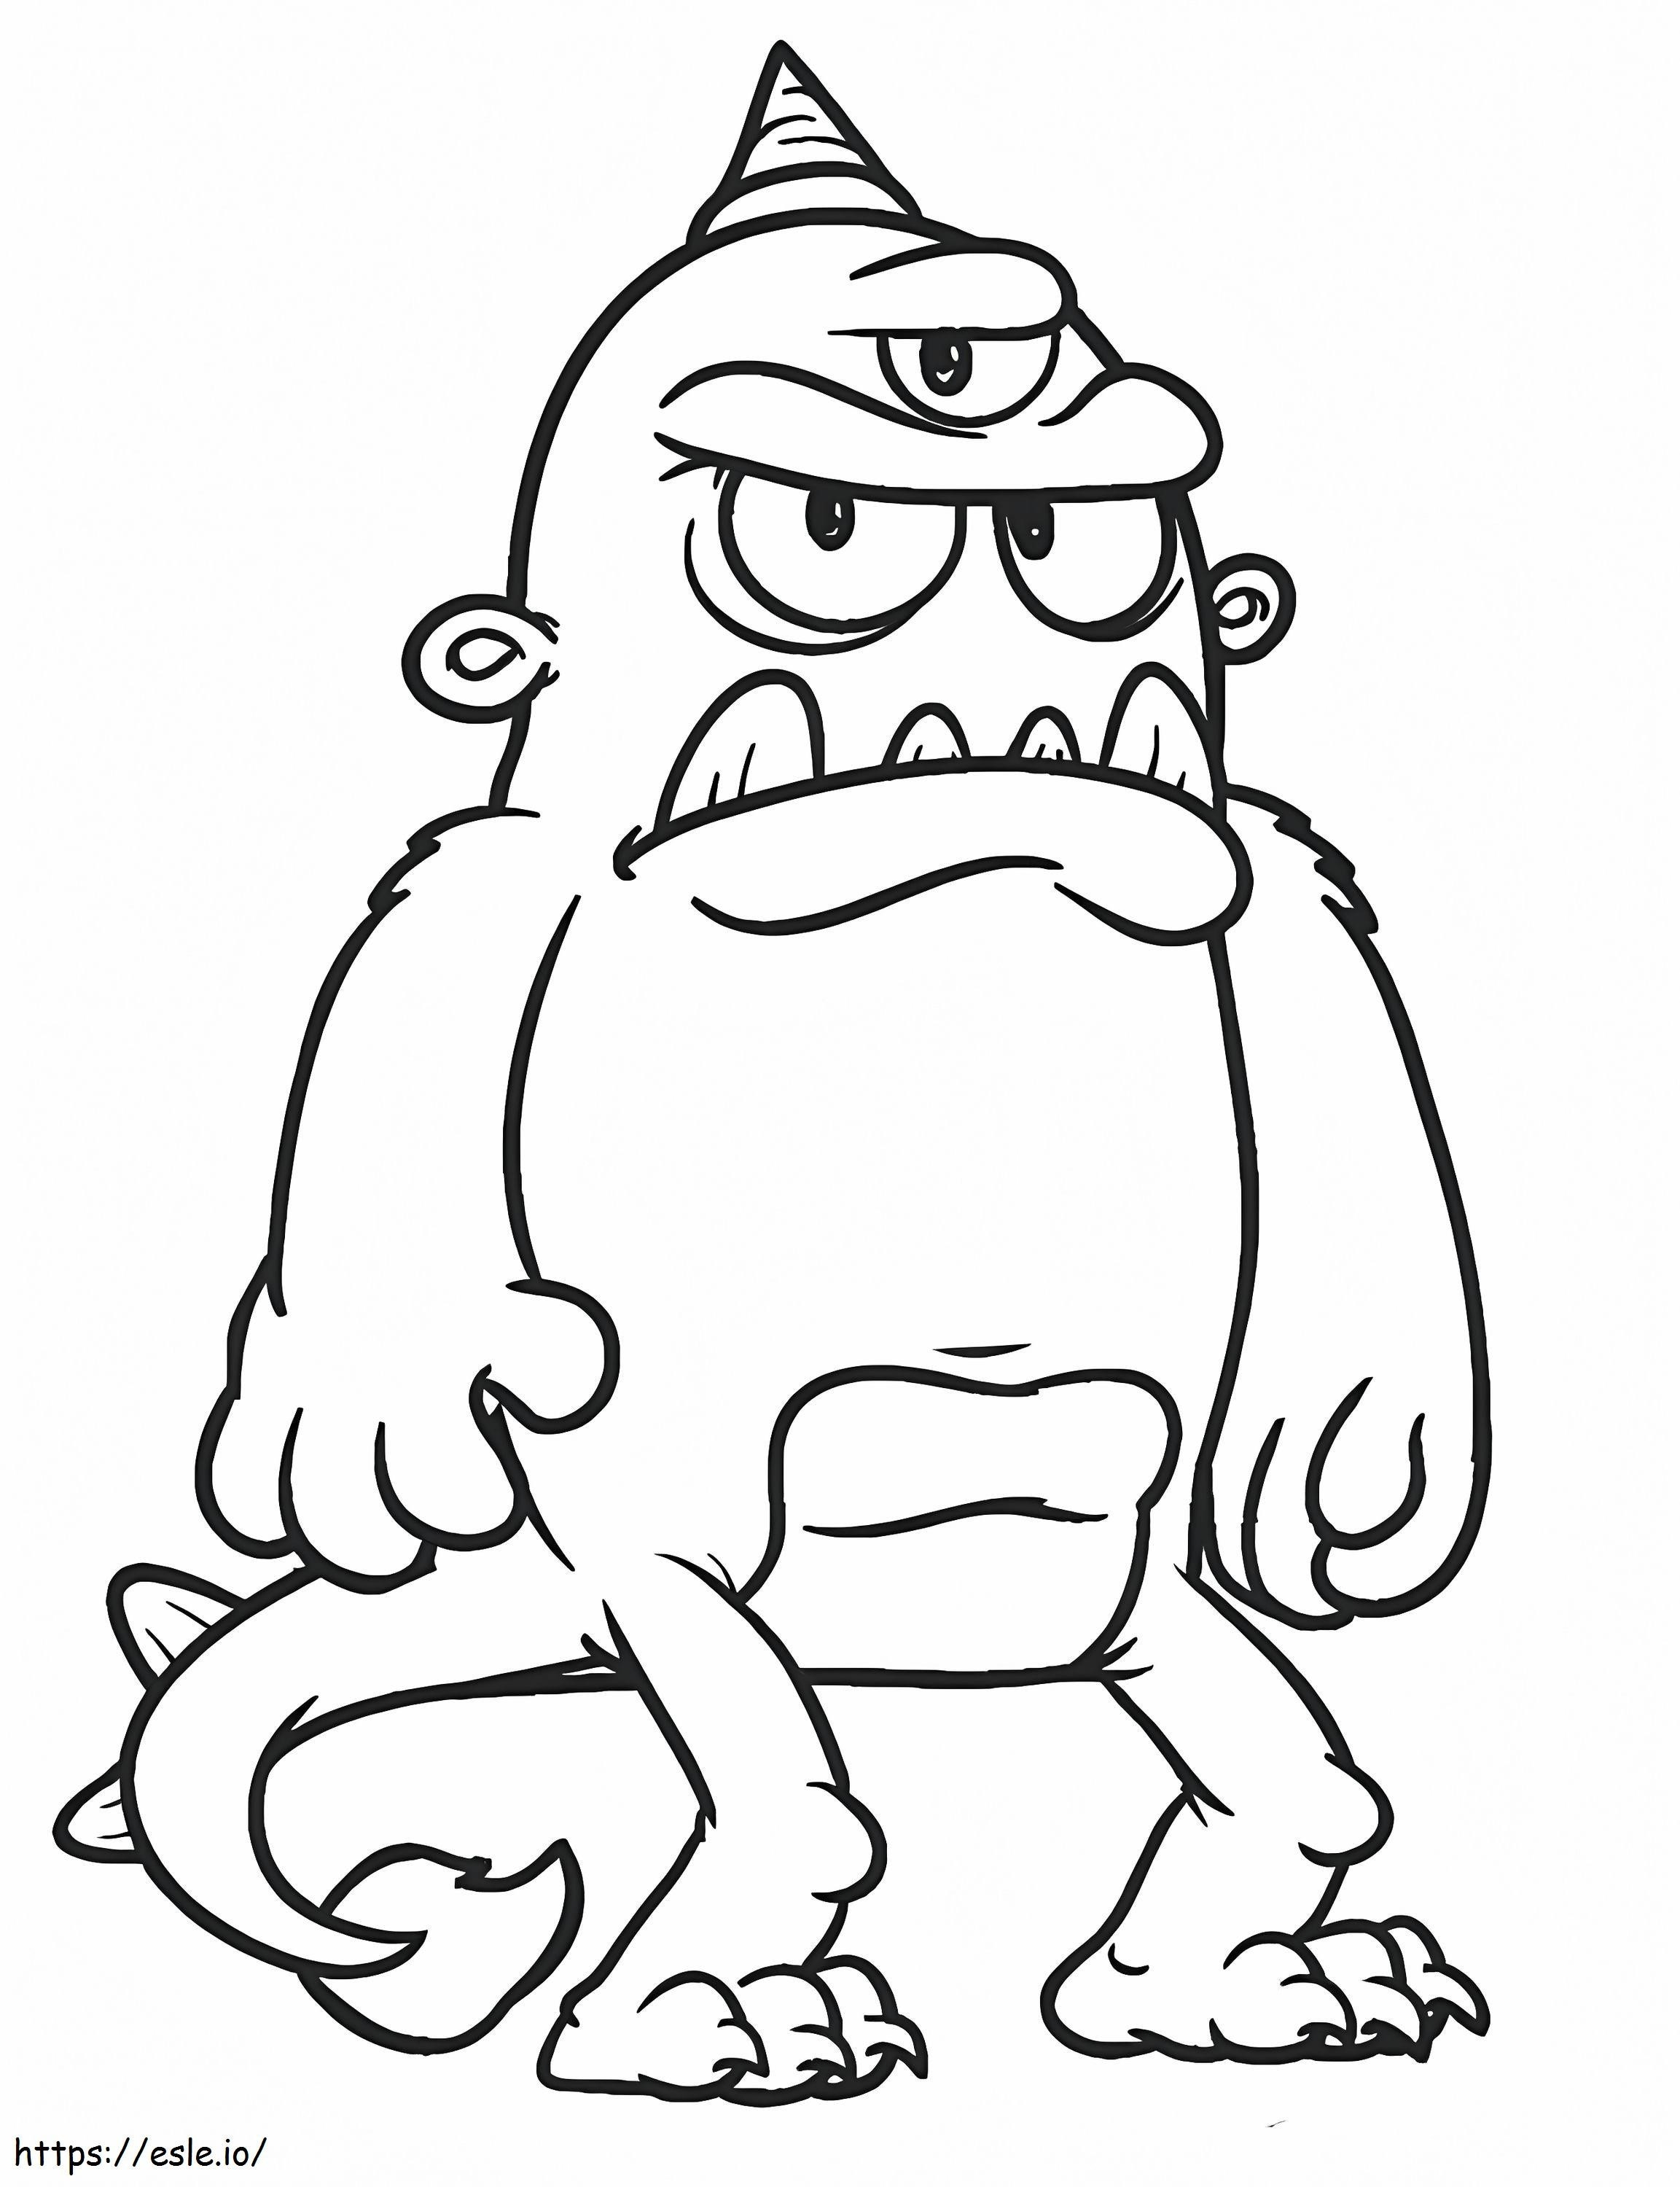 Big Mouth Goblin coloring page